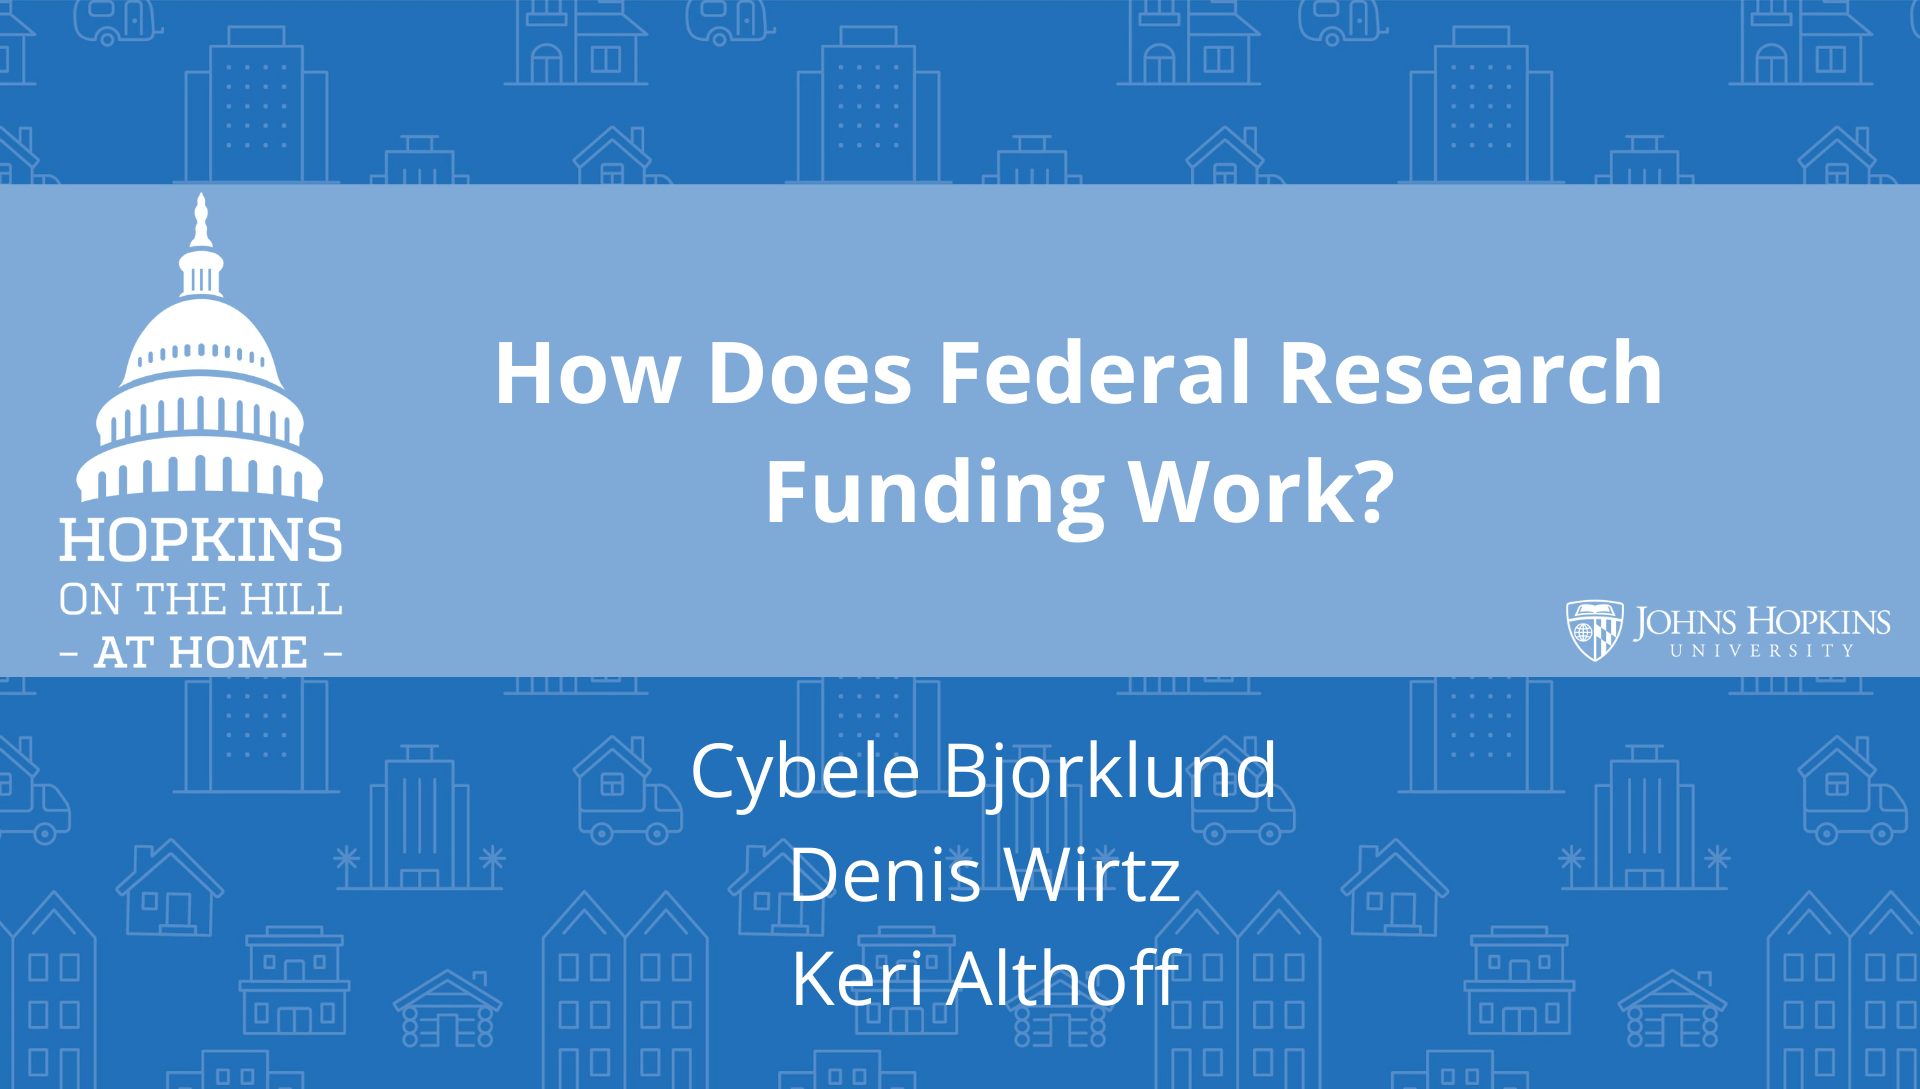 Hopkins on the Hill: How Does Federal Research Funding Work?